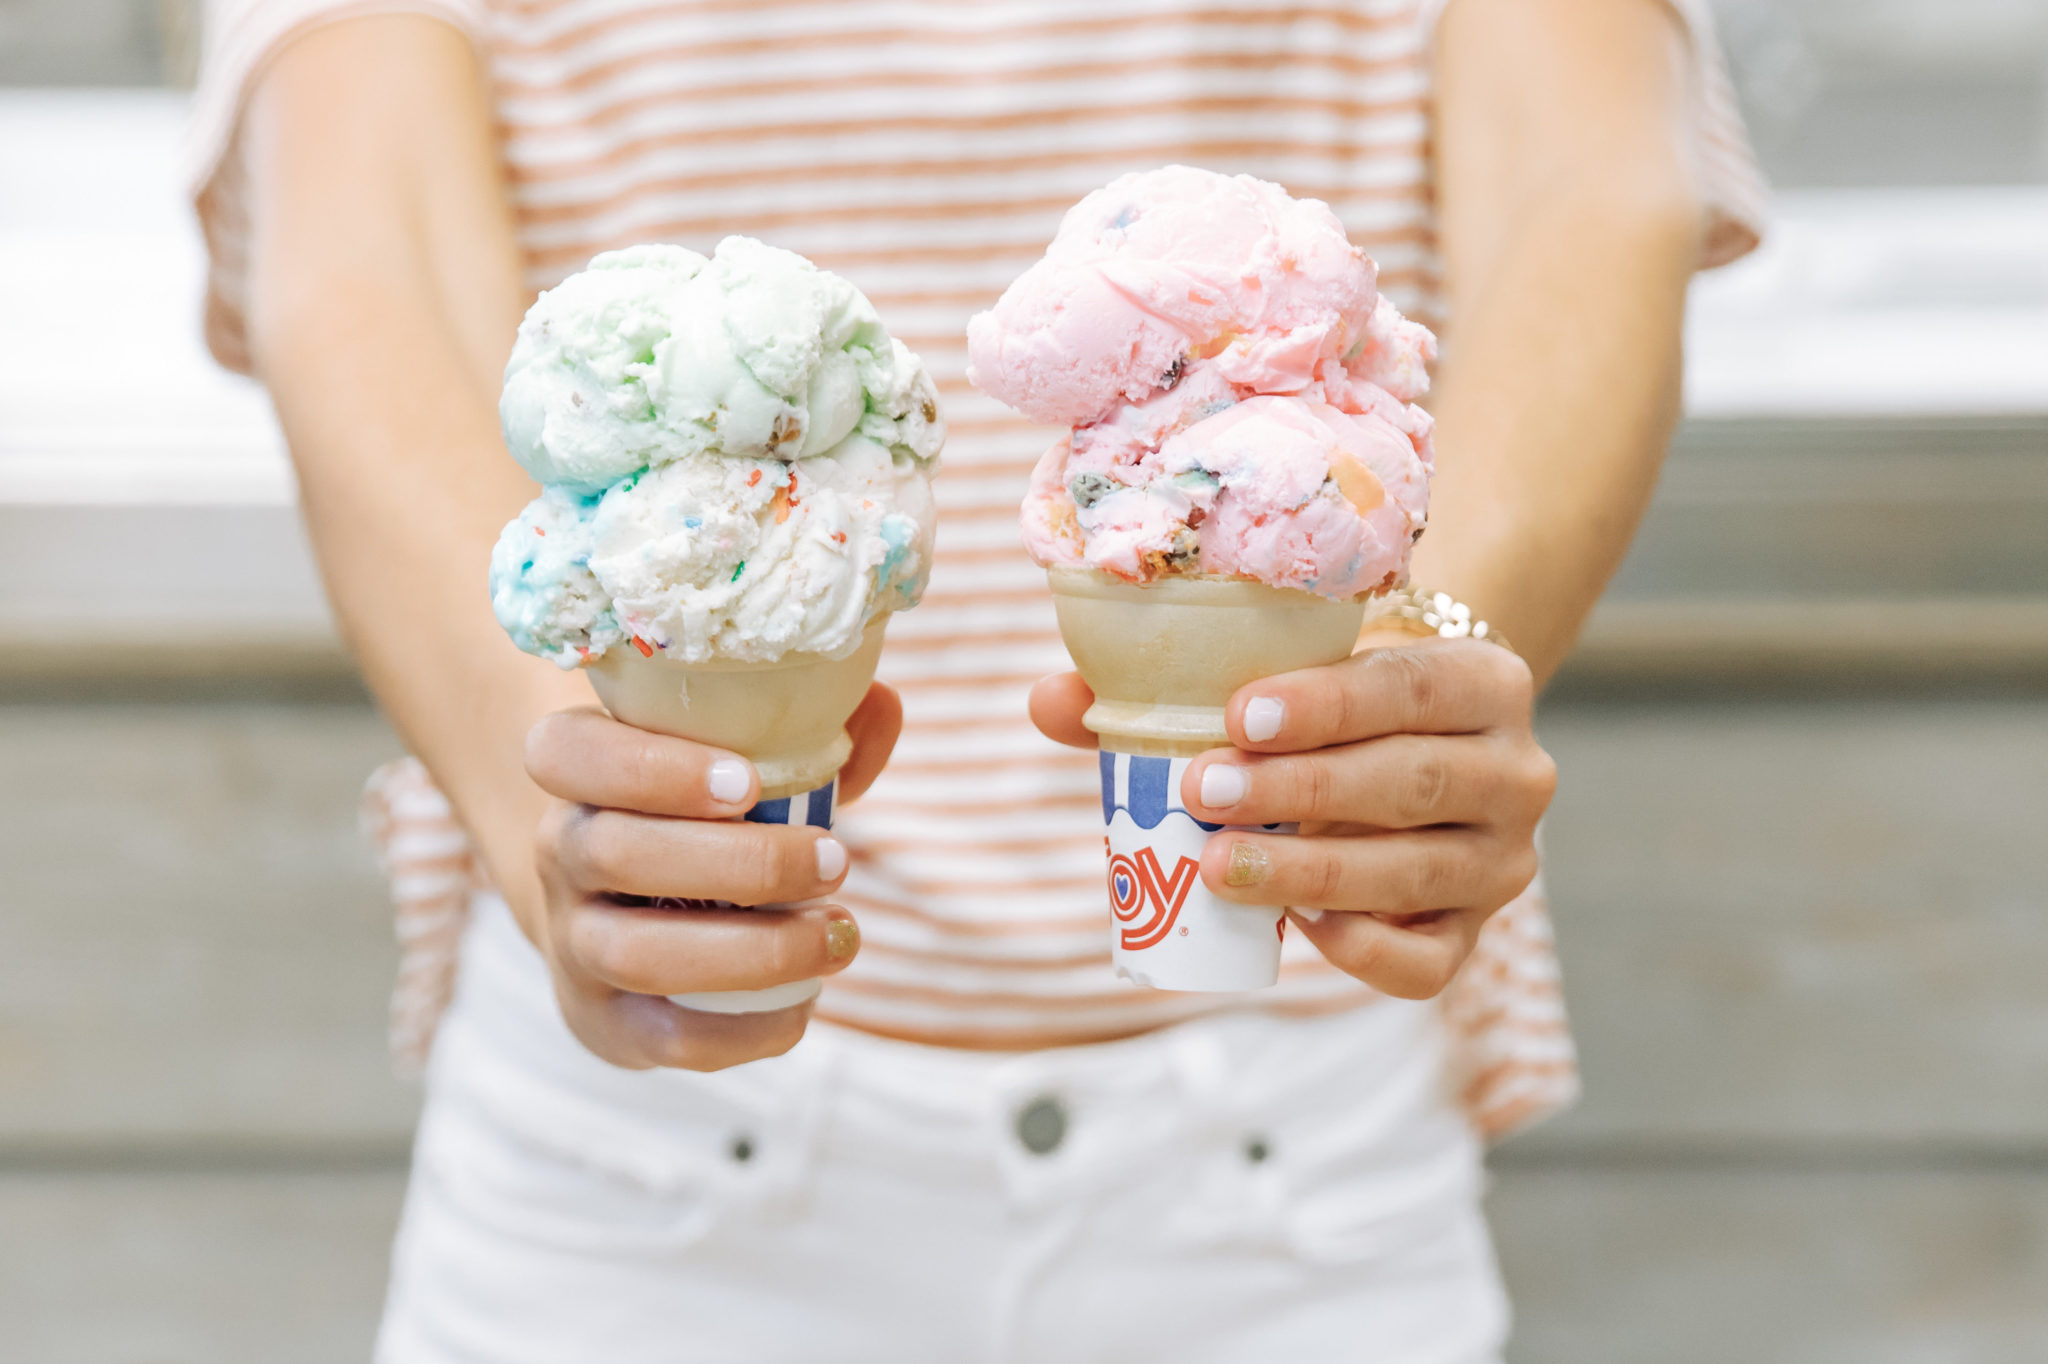 Striped shirt, white jeans and two ice cream cones that are pink and green